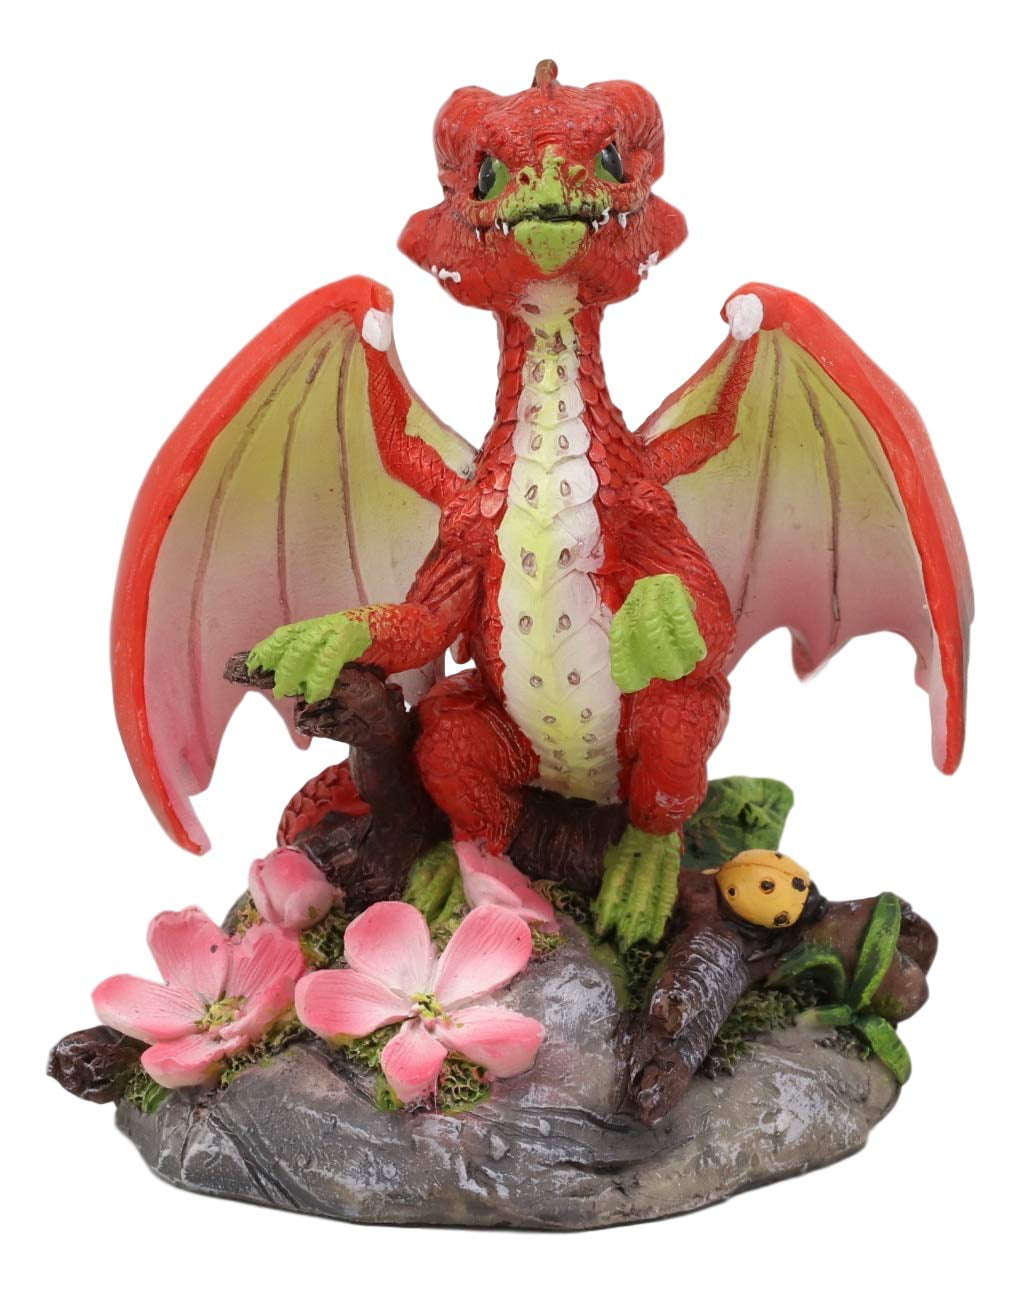 FAIRY STATUE FIGURINE HIGH END POLY RESIN HAND PAINTED BERRIES 